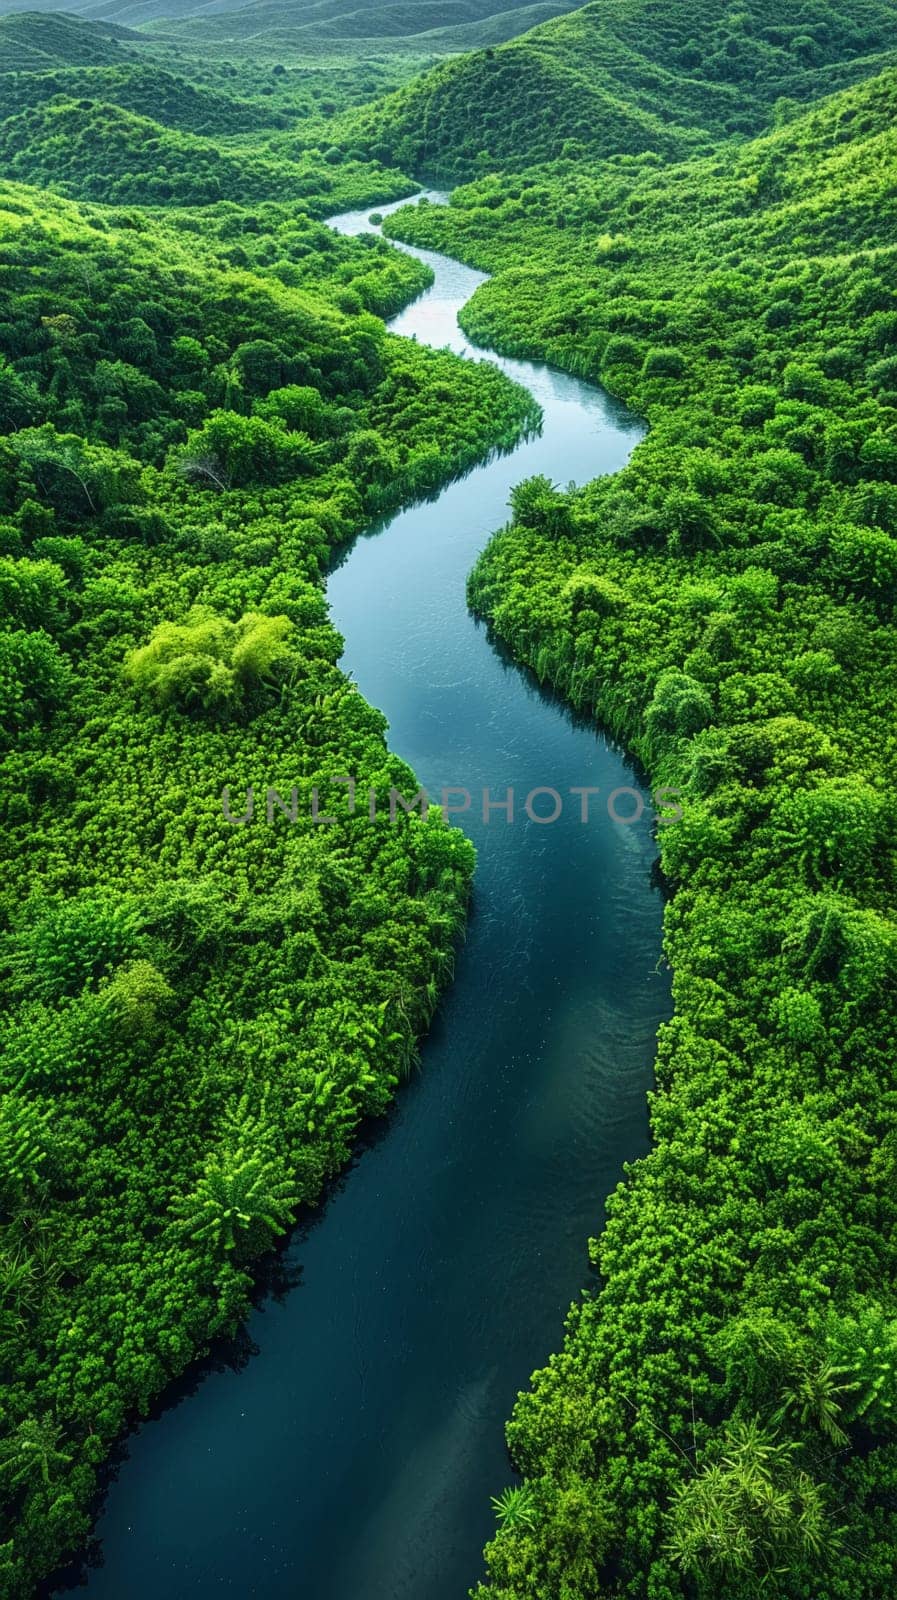 Aerial view of a winding river through lush landscapes, illustrating the beauty of nature.